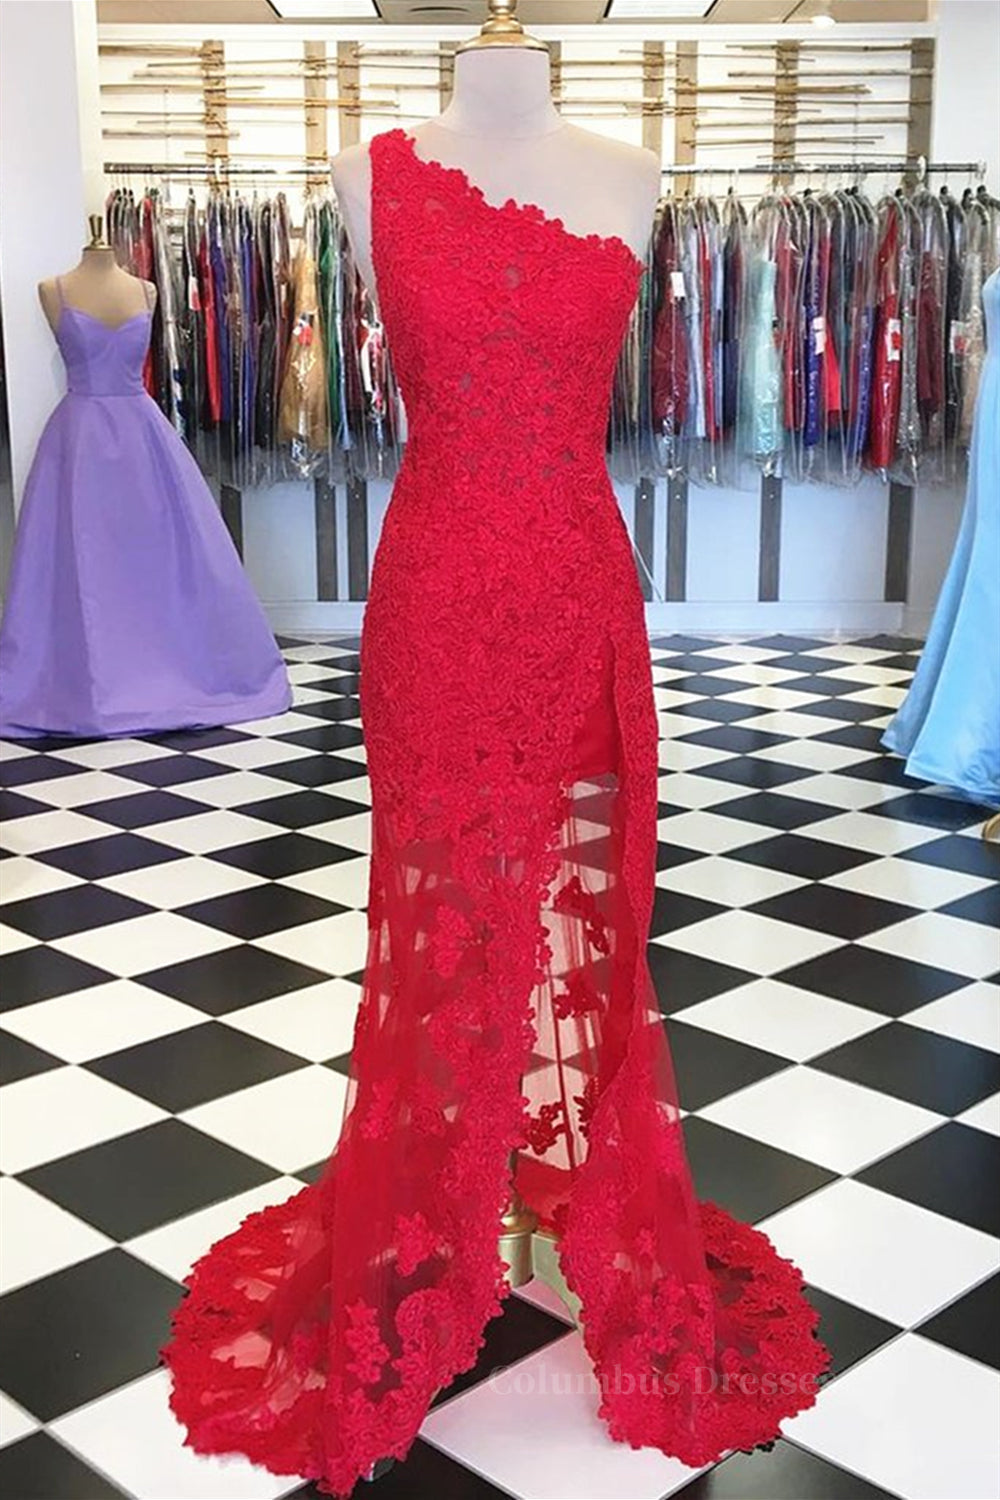 Fancy Outfit, One Shoulder Mermaid Red Lace Long Prom Dresses with High Slit